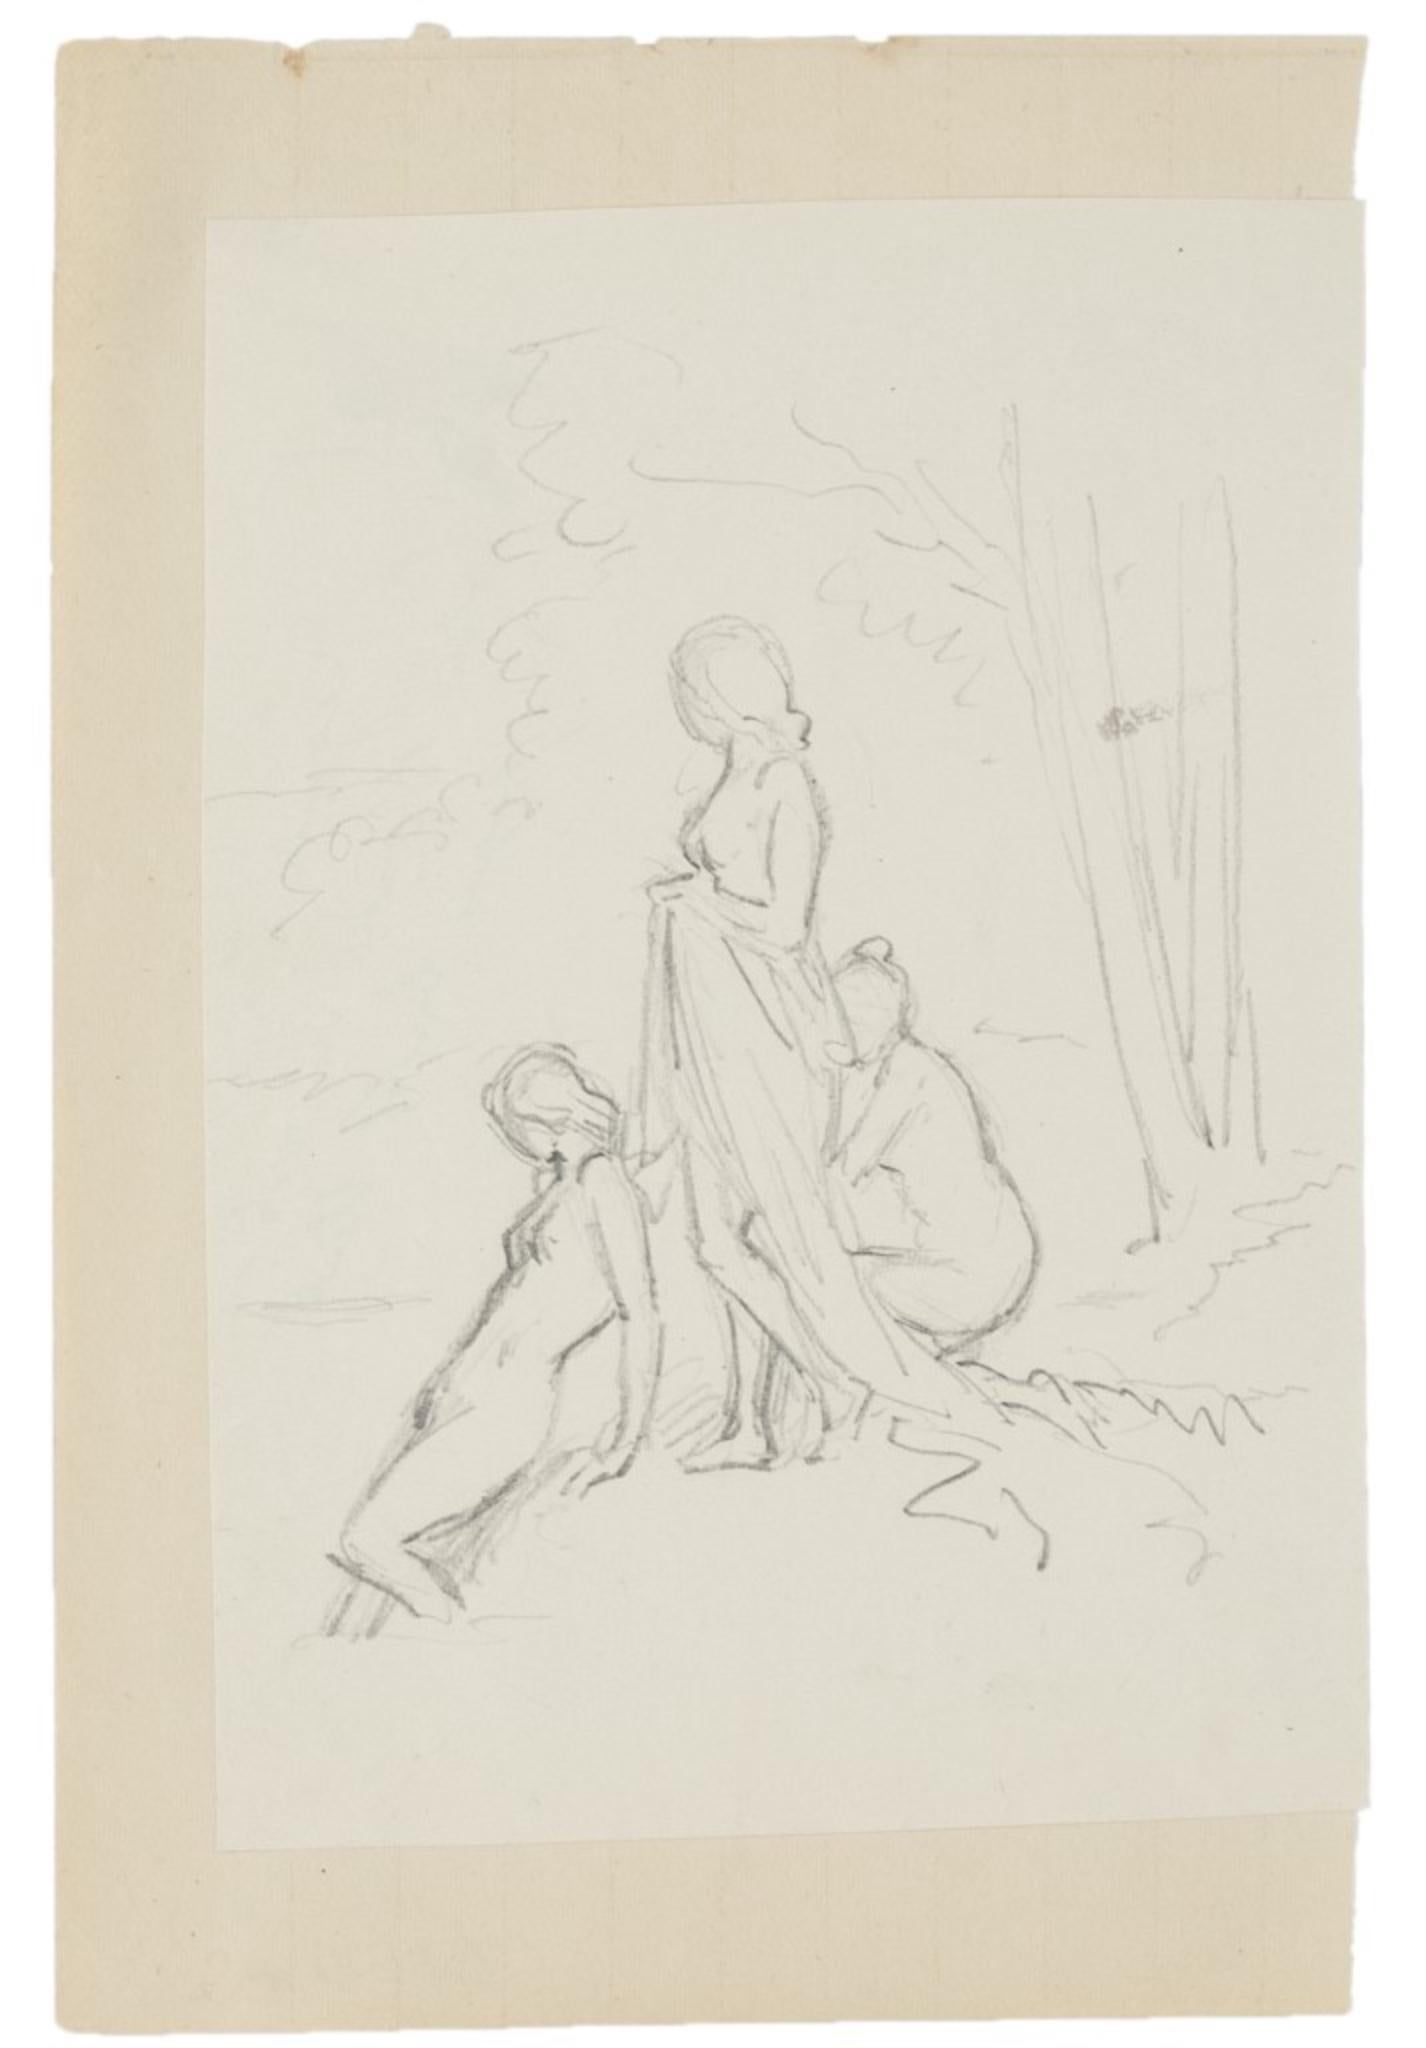 Unknown Nude - Group of Figures - Original Pencil Drawing - 20th Century